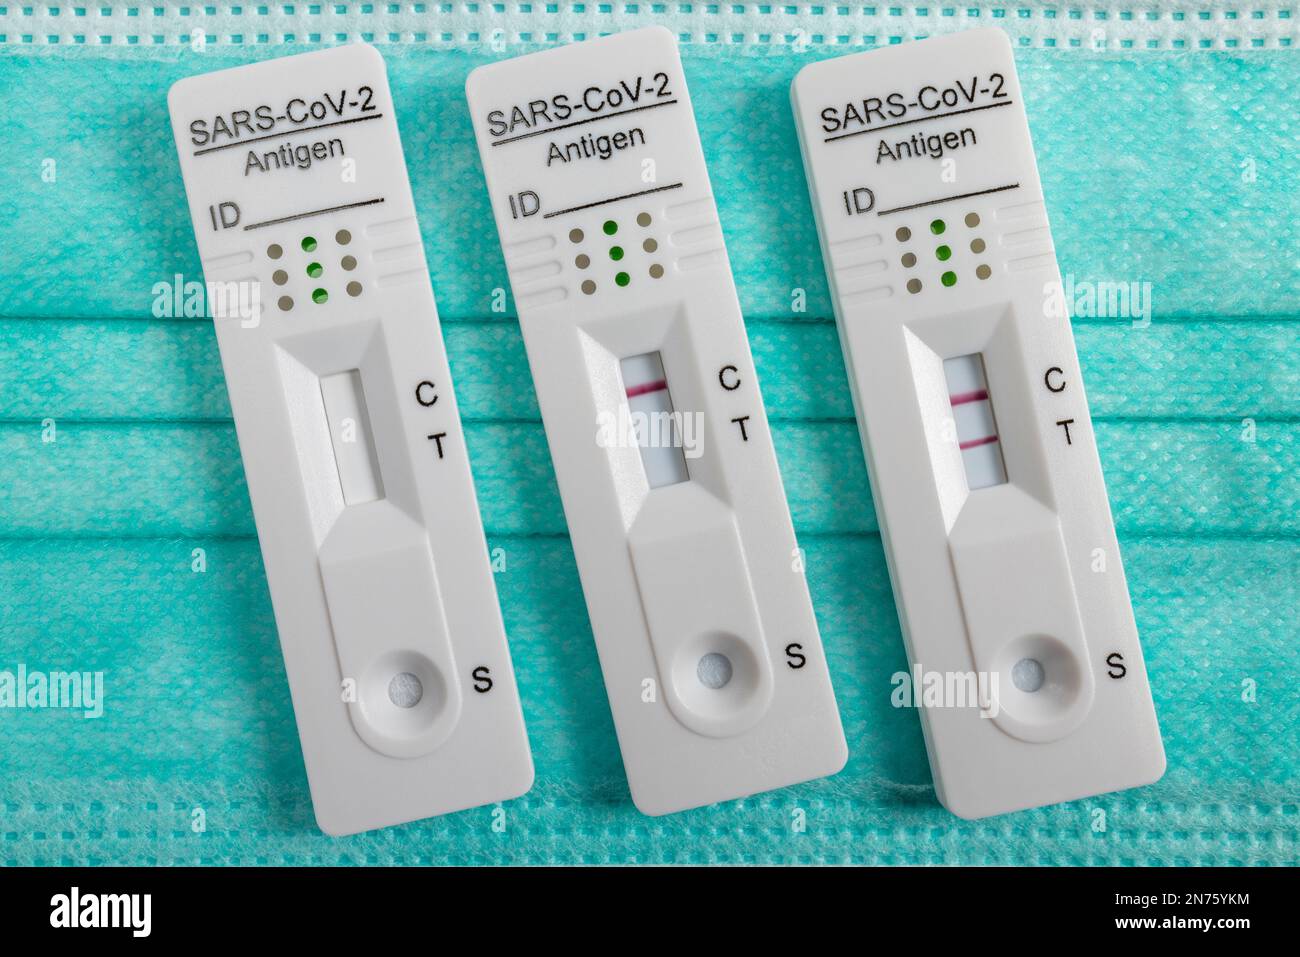 Medical Mouth Nasal Protective Mask, three Rapid SARS-CoV-2 Antigen Test Cassettes, one new antigen test cassette and two used ones, with one negative and one positive test result, Stock Photo